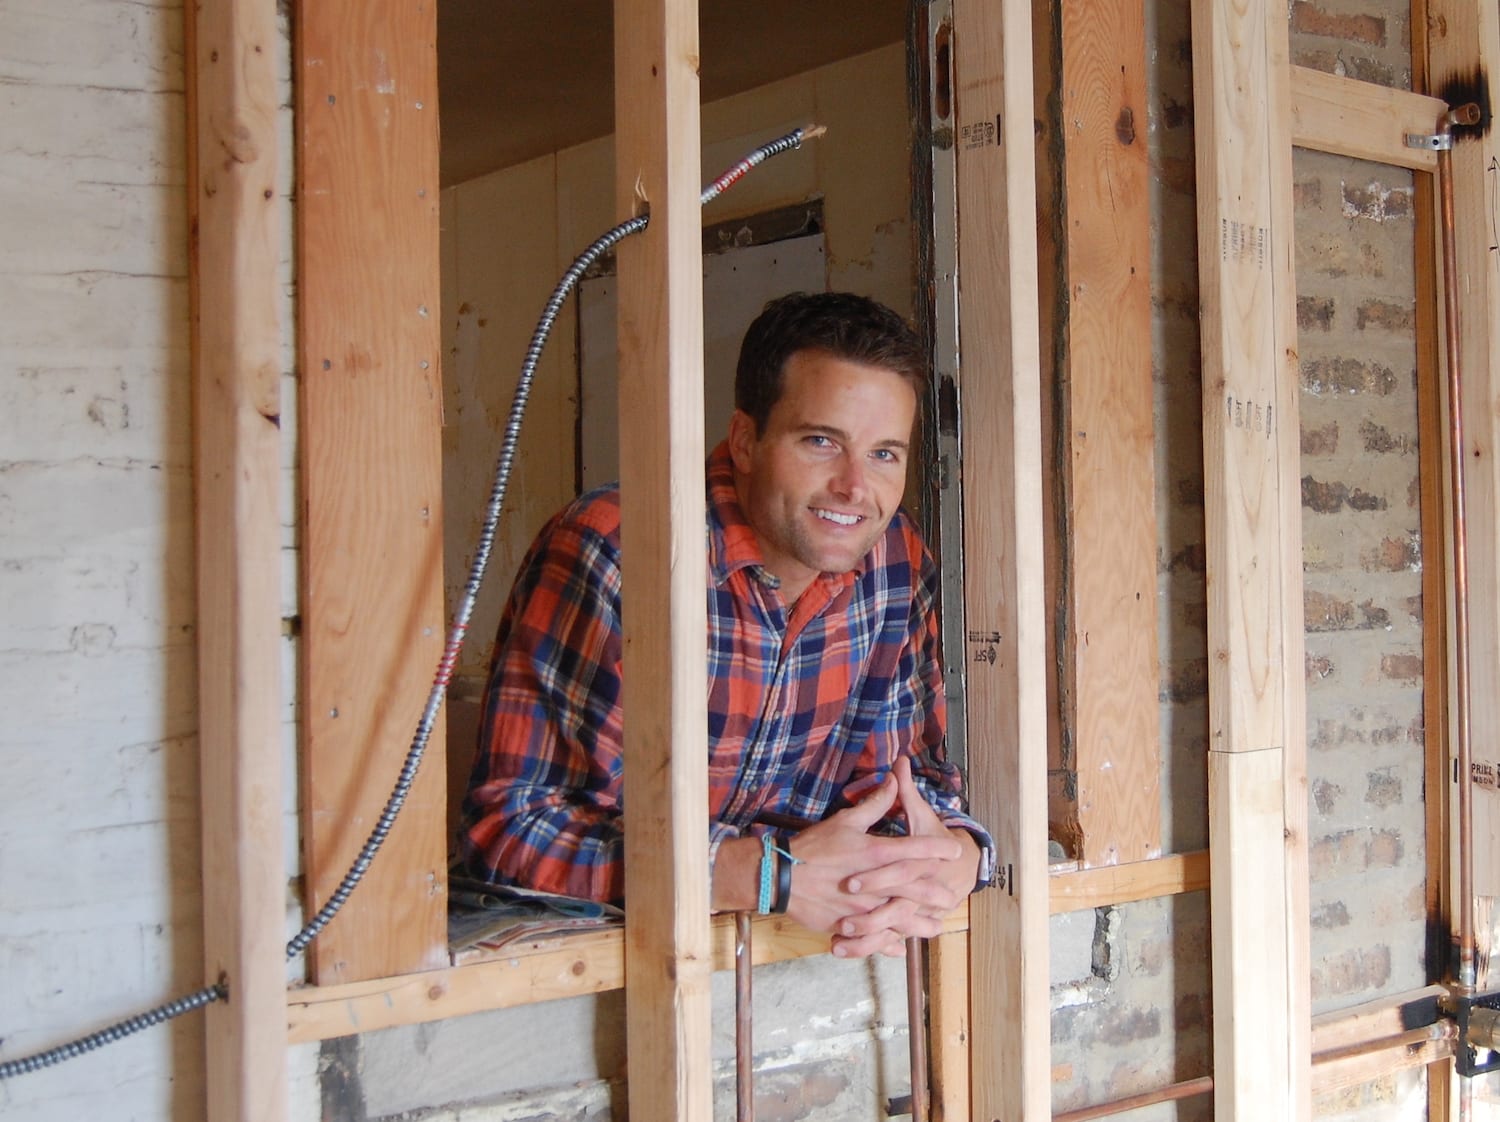 Army veteran Kirby Atwell at a home that he's renovating as a real estate entrepreneur